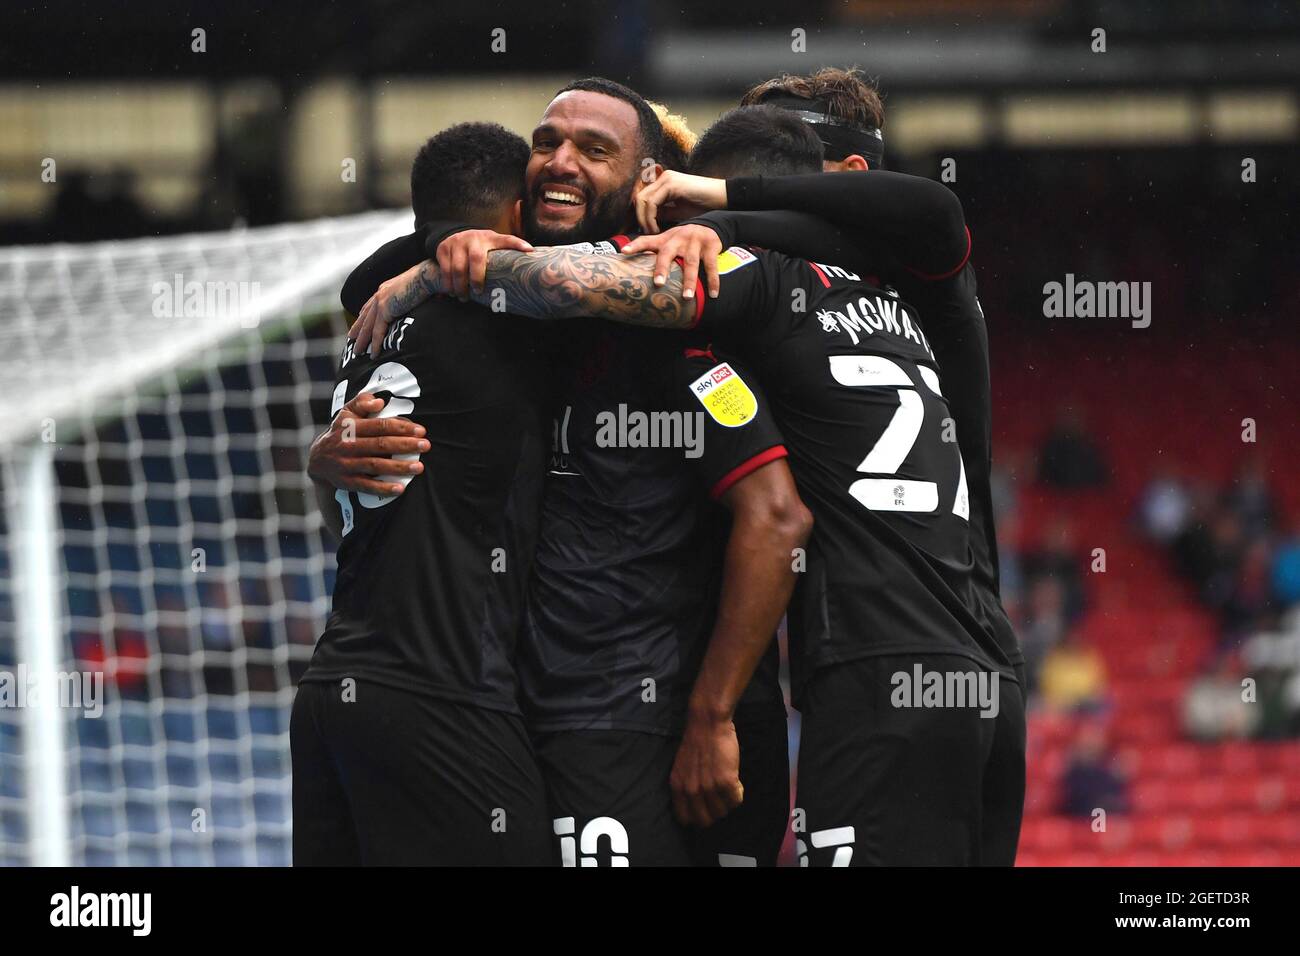 West Bromwich Albion's Matt Phillips celebrates scoring his side's second goal of the game during the Sky Bet Championship match at Ewood Park, Blackburn. Picture date: Saturday August 21, 2021. Stock Photo